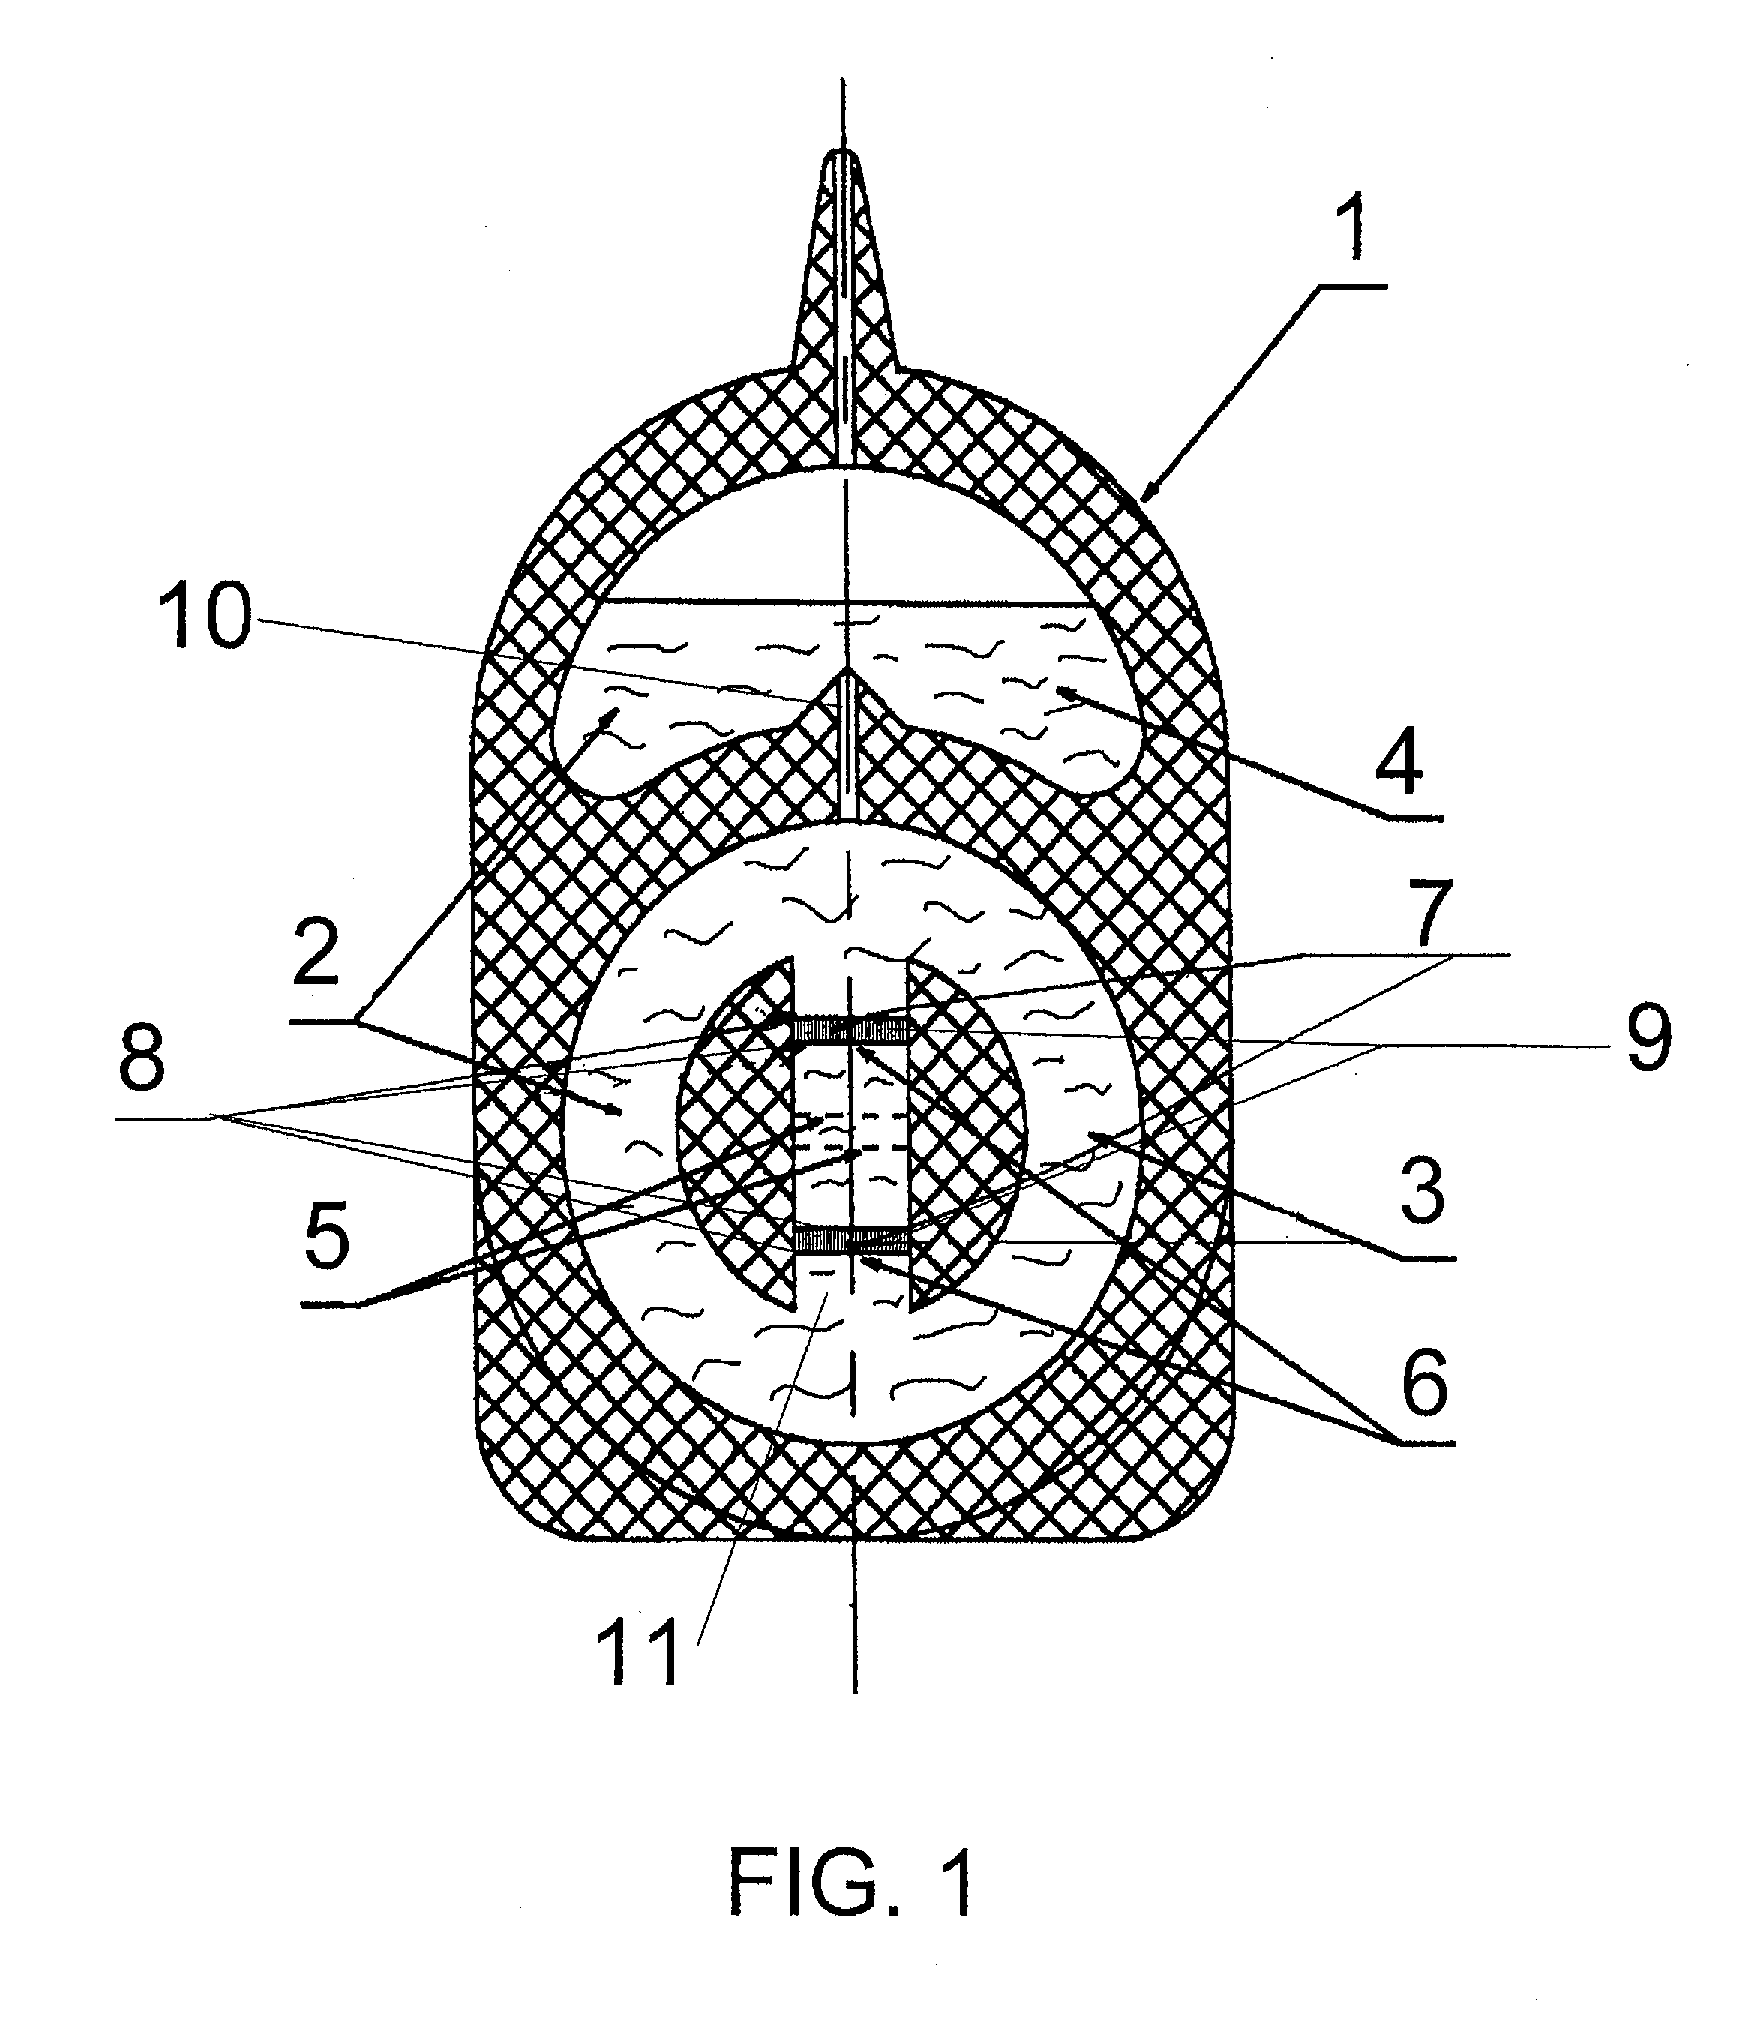 Convective Accelerometer with "Positive' or "Negative" Inertial Mass